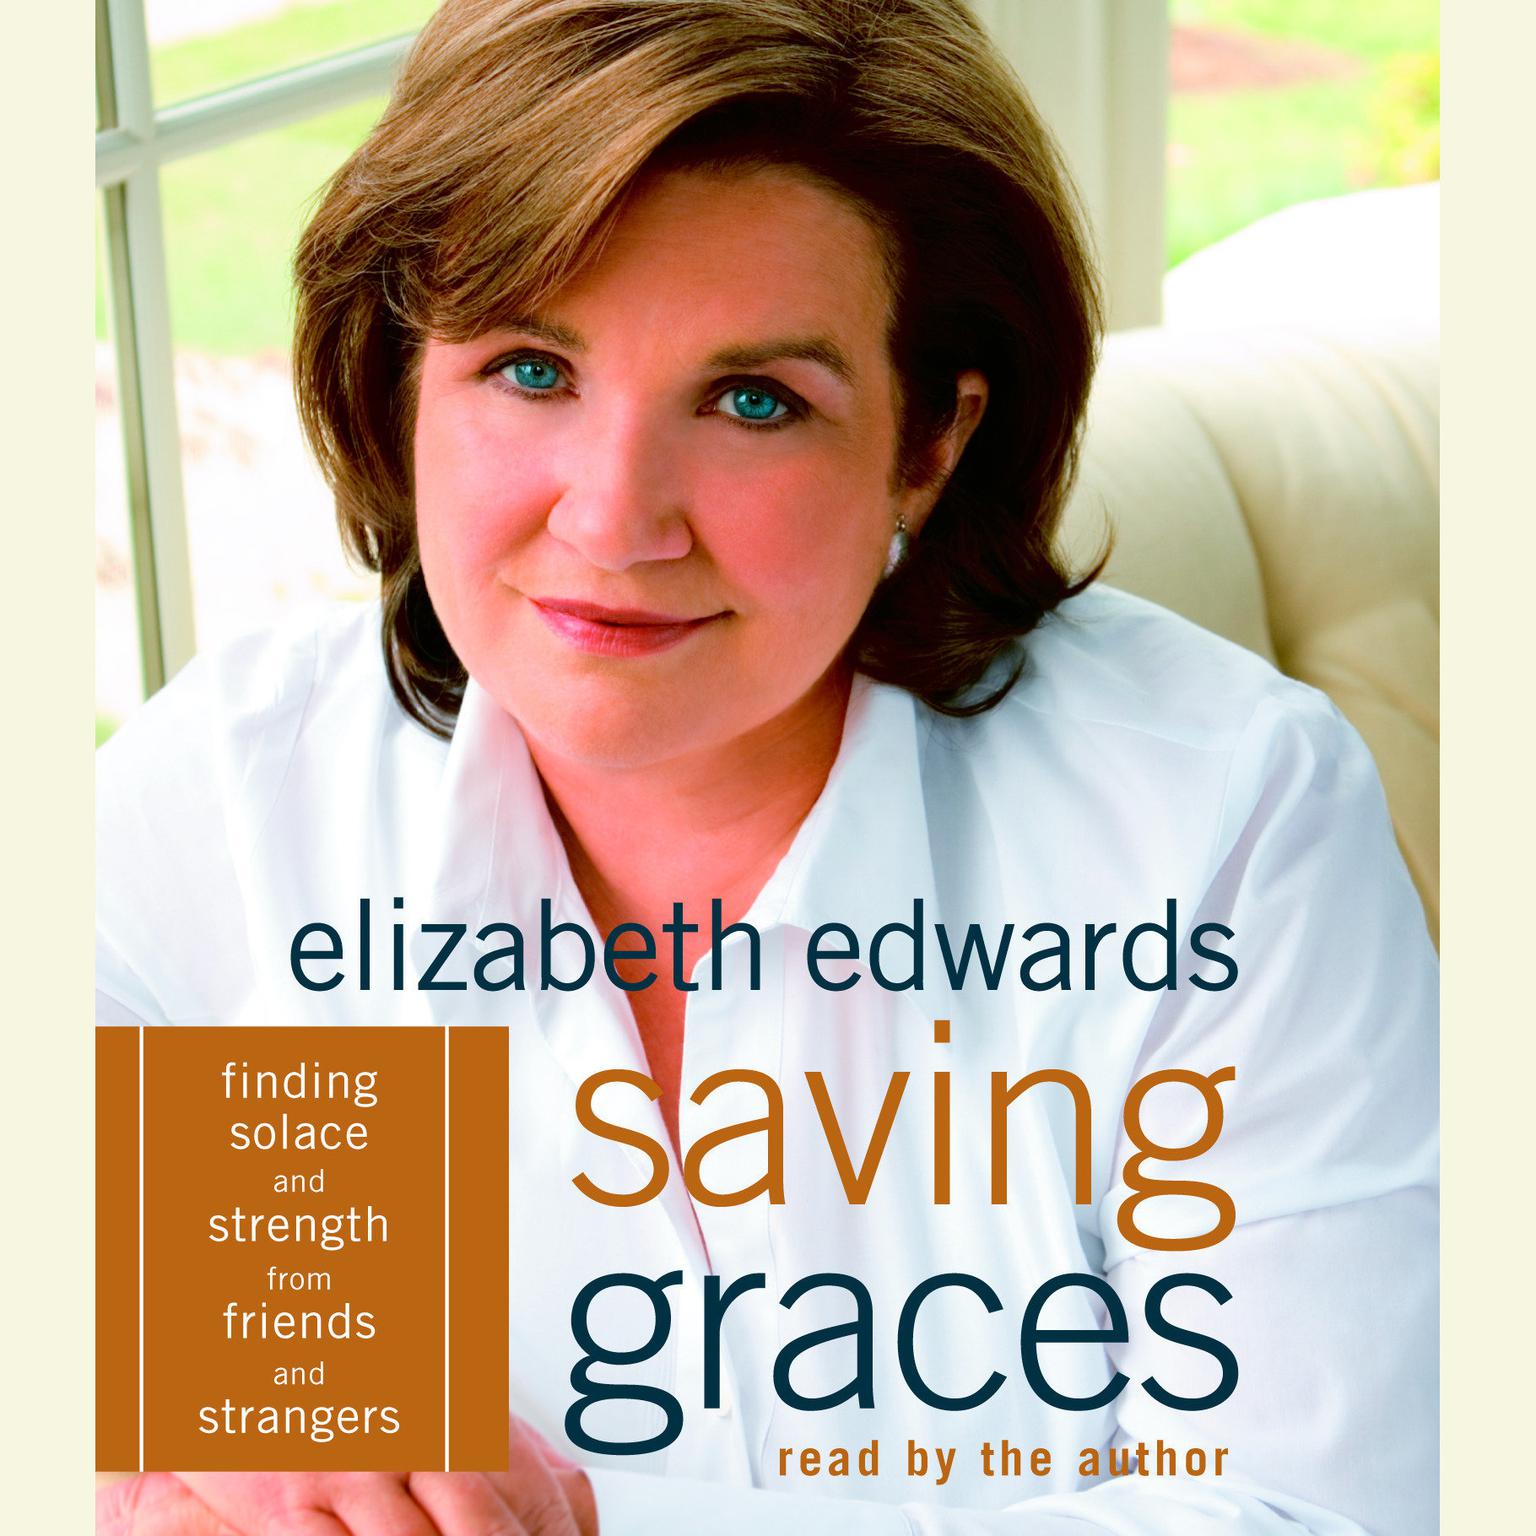 Saving Graces (Abridged): Finding Solace and Strength from Friends and Strangers Audiobook, by Elizabeth Edwards